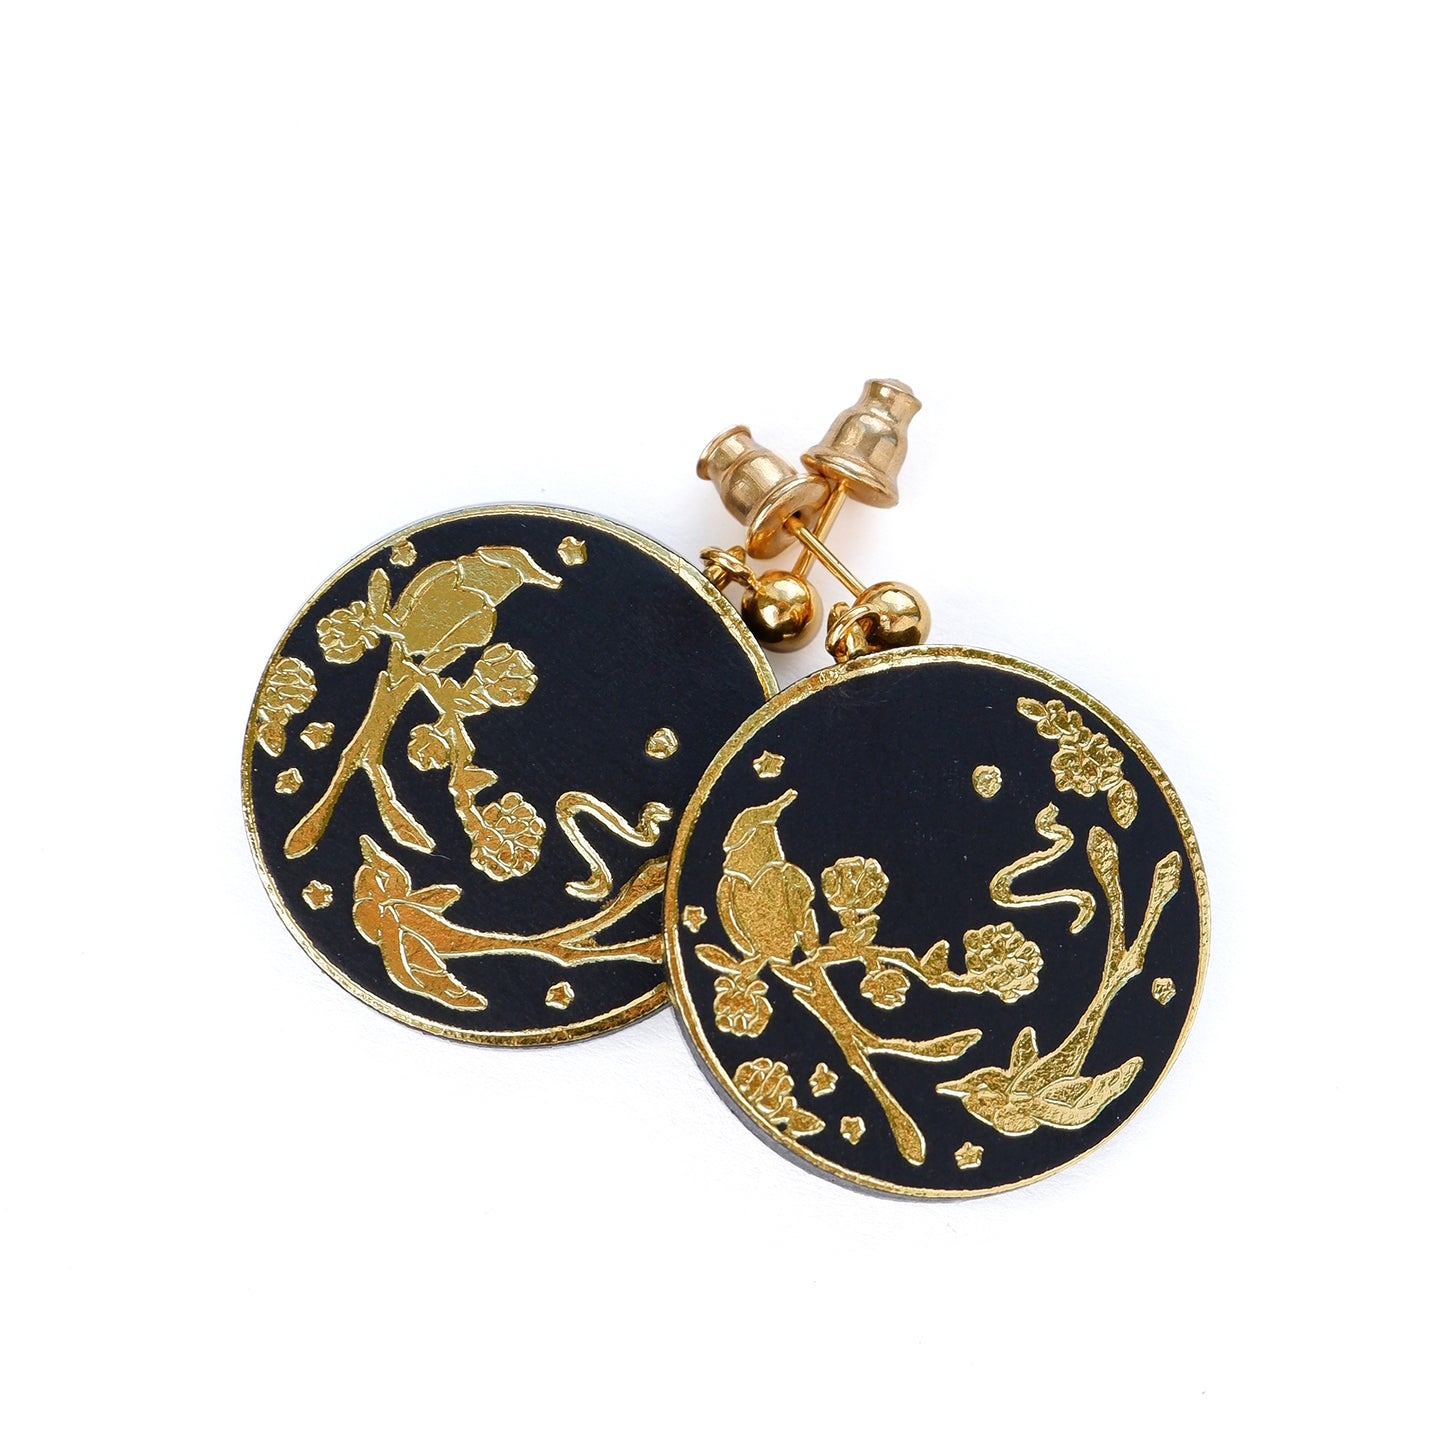 Black leather coin earrings, embossed with illustrations of birds in gold